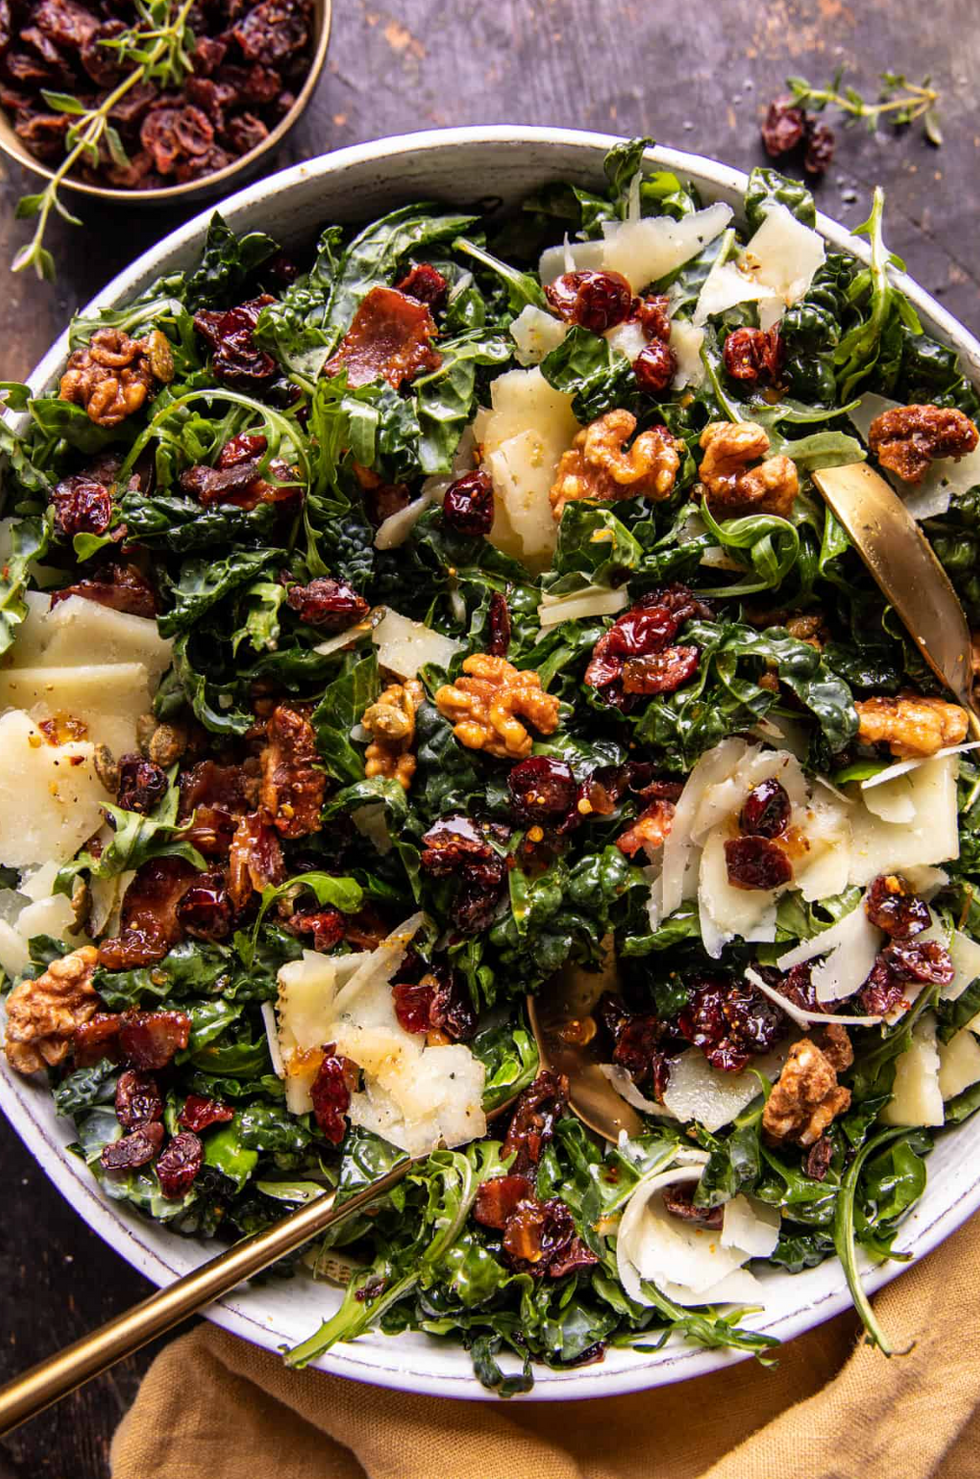 Kale Bacon Salad with Maple Candied Walnuts